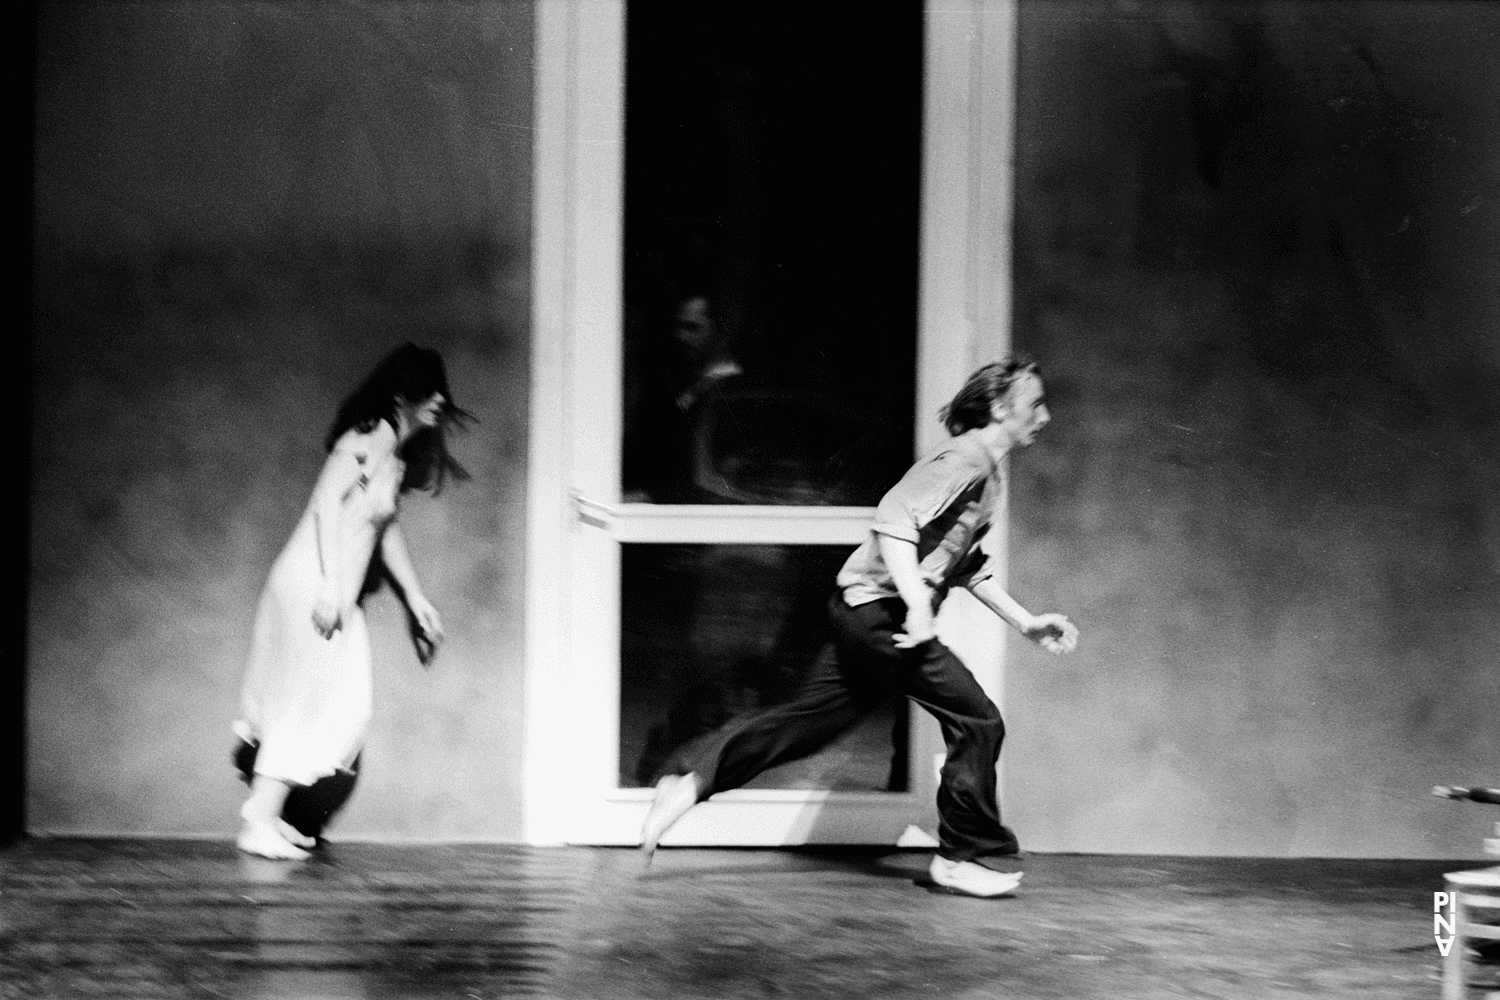 Dominique Mercy, Malou Airaudo and Rolf Borzik in “Café Müller” by Pina Bausch